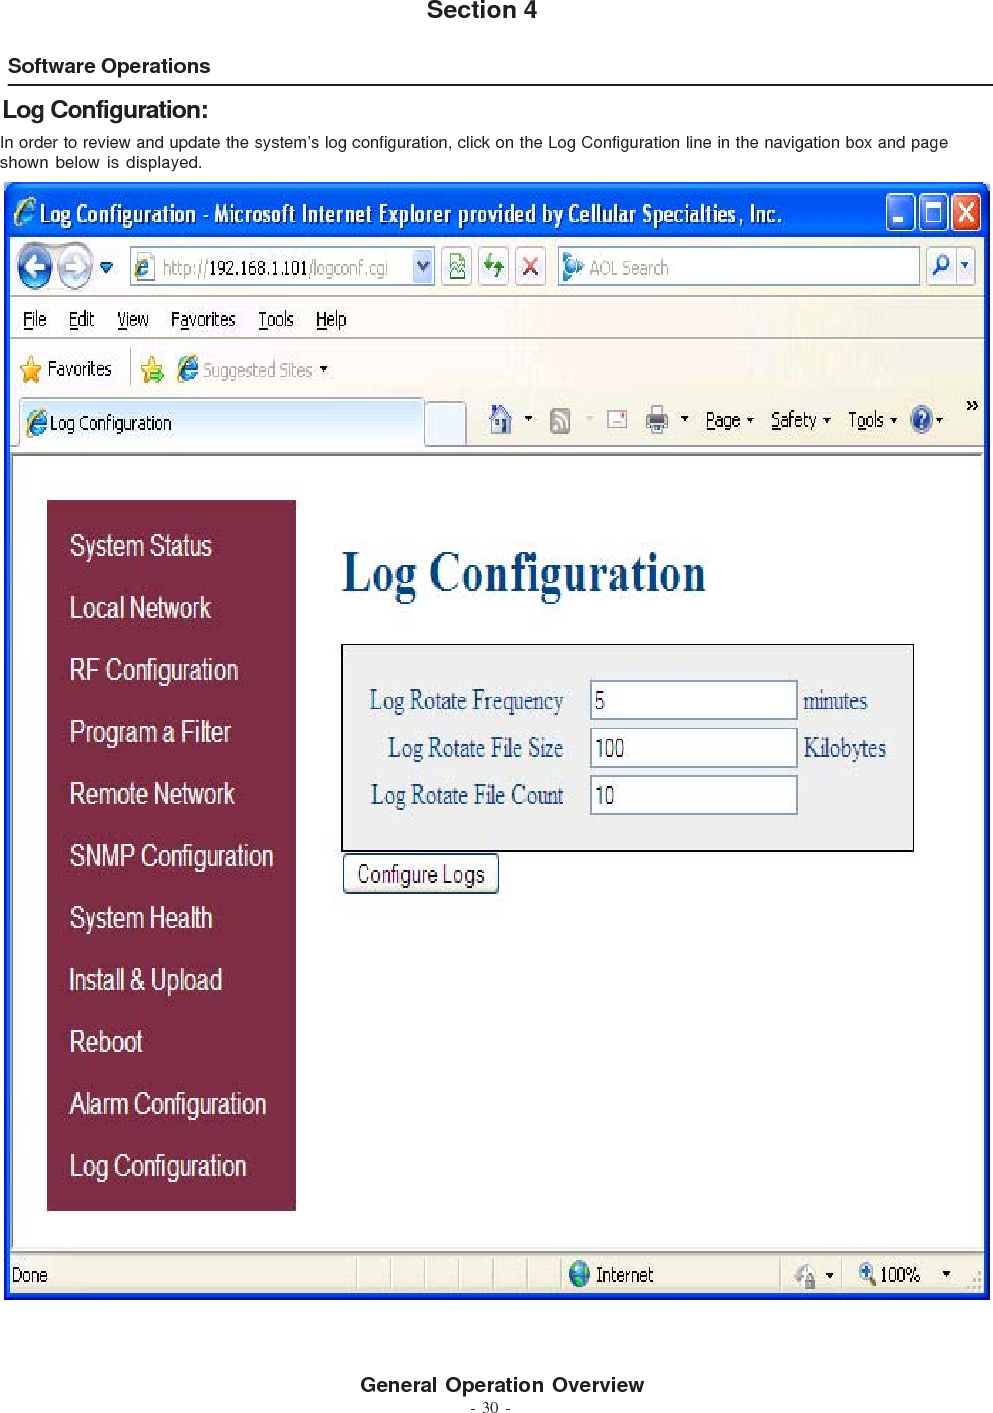 - 30 -Software OperationsSection 4In order to review and update the system’s log configuration, click on the Log Configuration line in the navigation box and pageshown below is displayed.Log Configuration:General Operation Overview